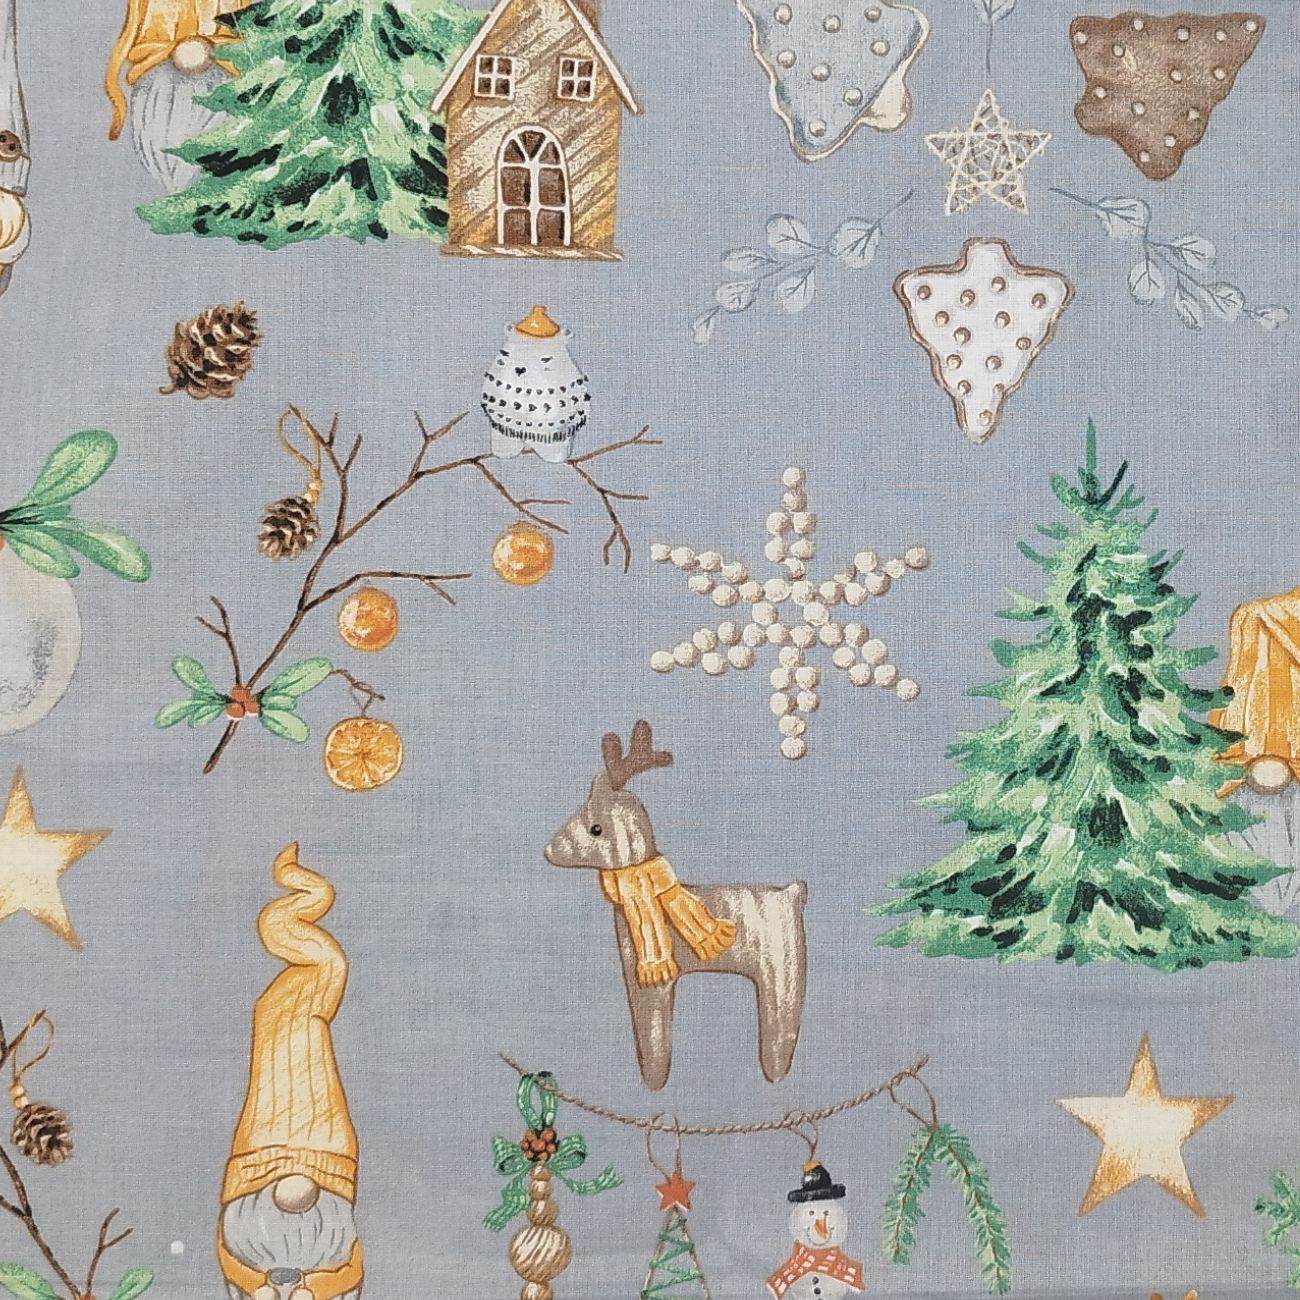 CHRISTMAS DECORATIONS - Cotton woven fabric